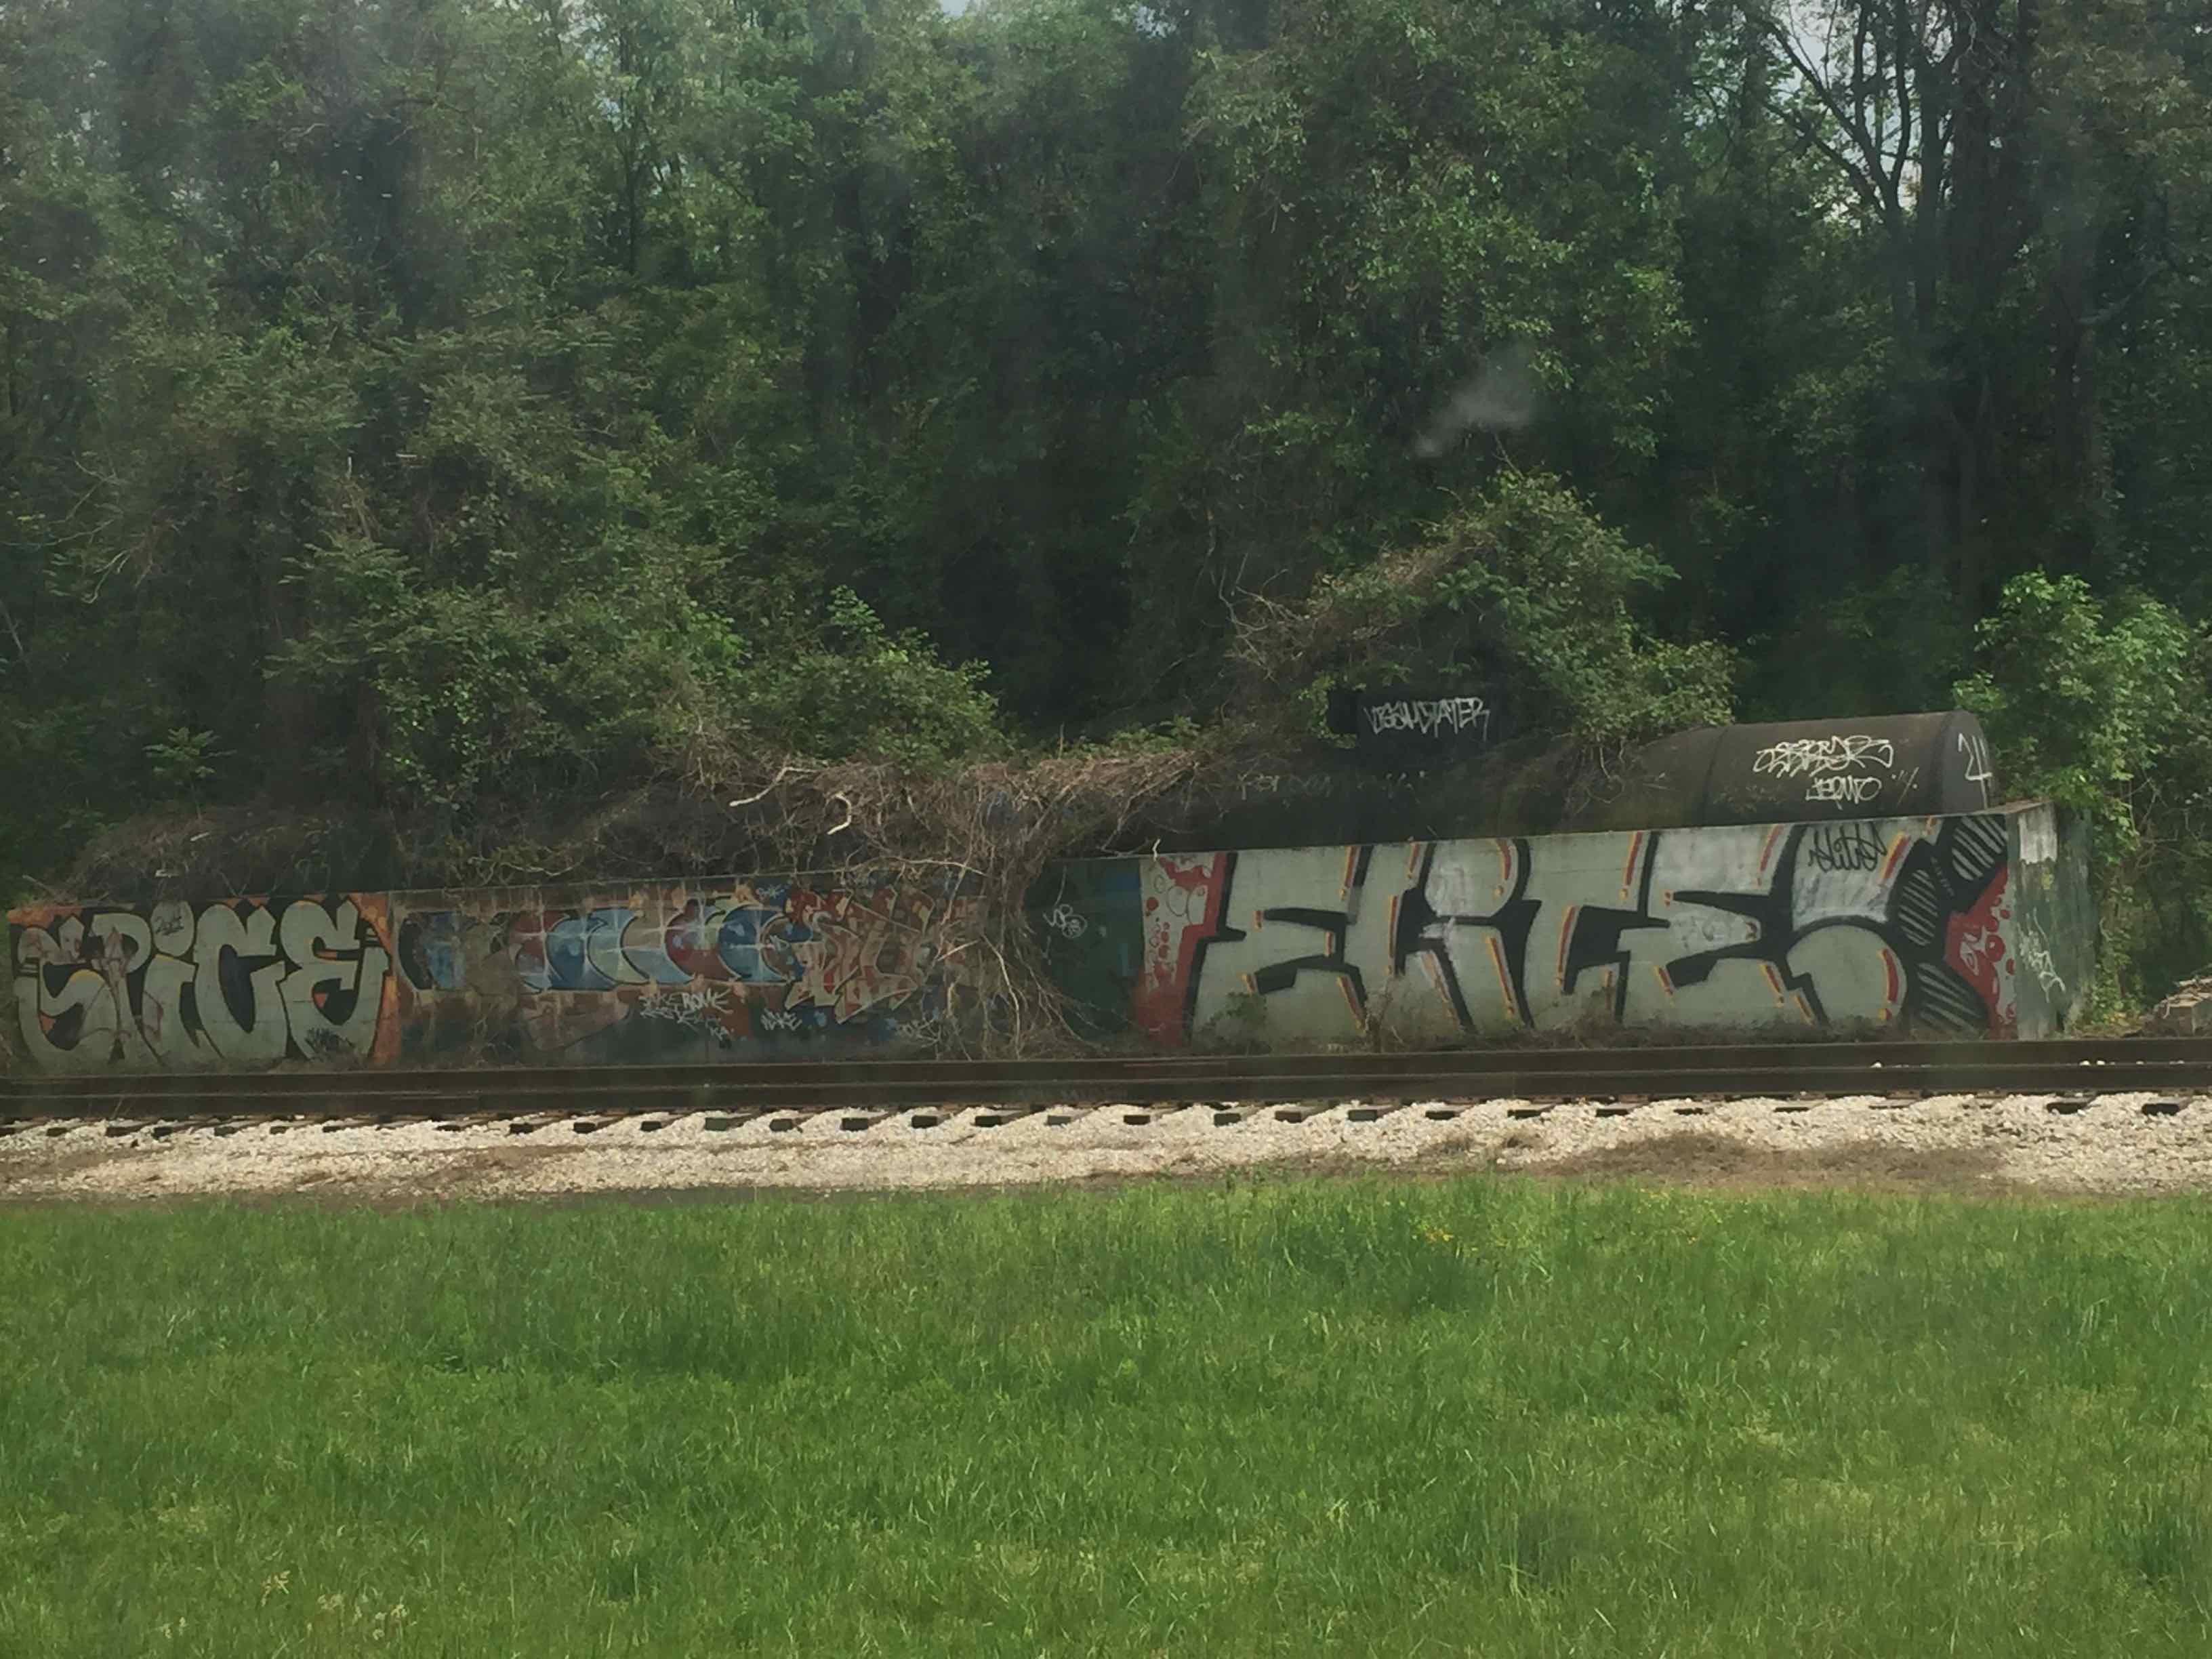 Photo: Rusted out oil tanker covered with graffiti in front of train tracks and grass